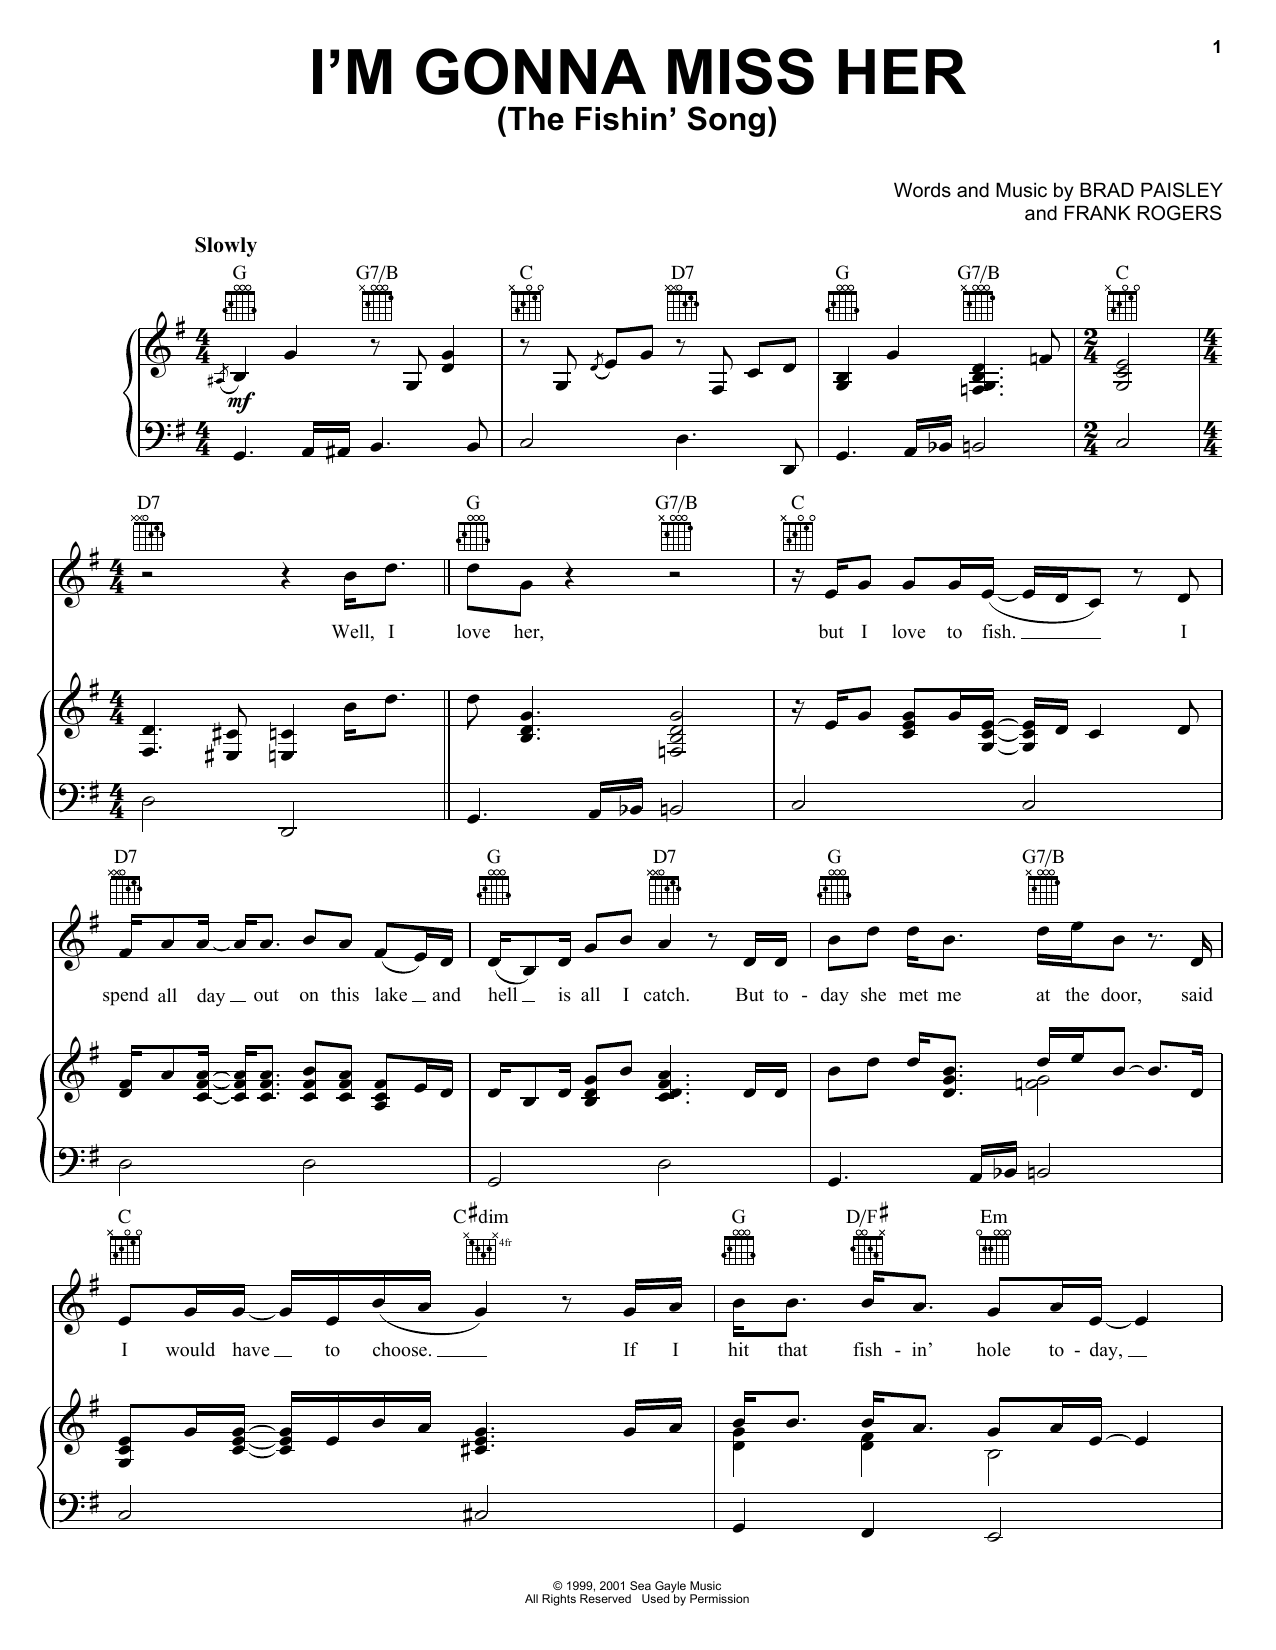 Brad Paisley I'm Gonna Miss Her (The Fishin' Song) sheet music notes and chords. Download Printable PDF.